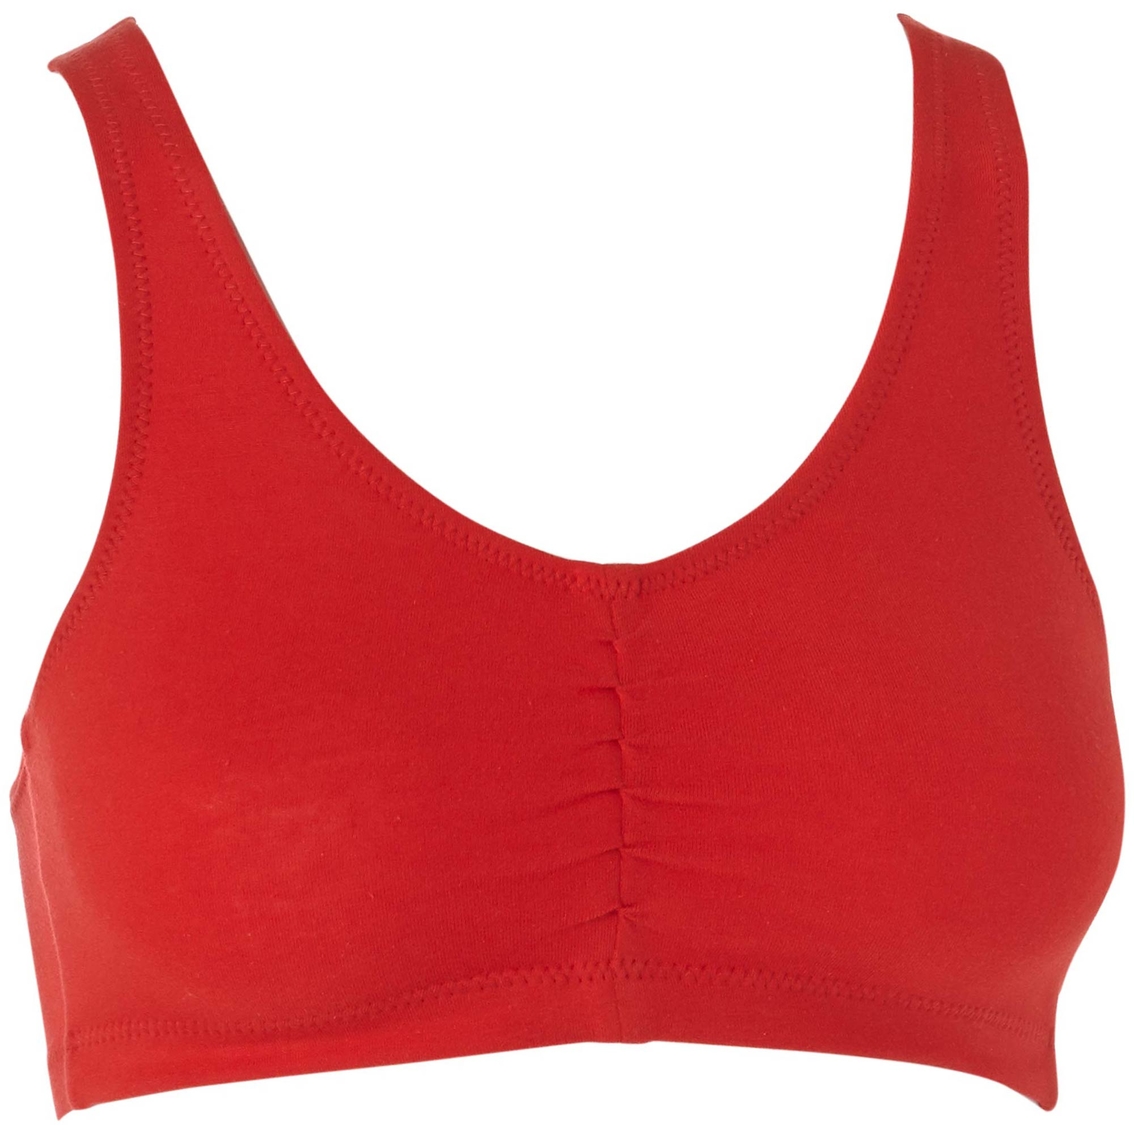 New with tags! Hanes Women's X-Temp ComfortFlex Fit Pullover Bra